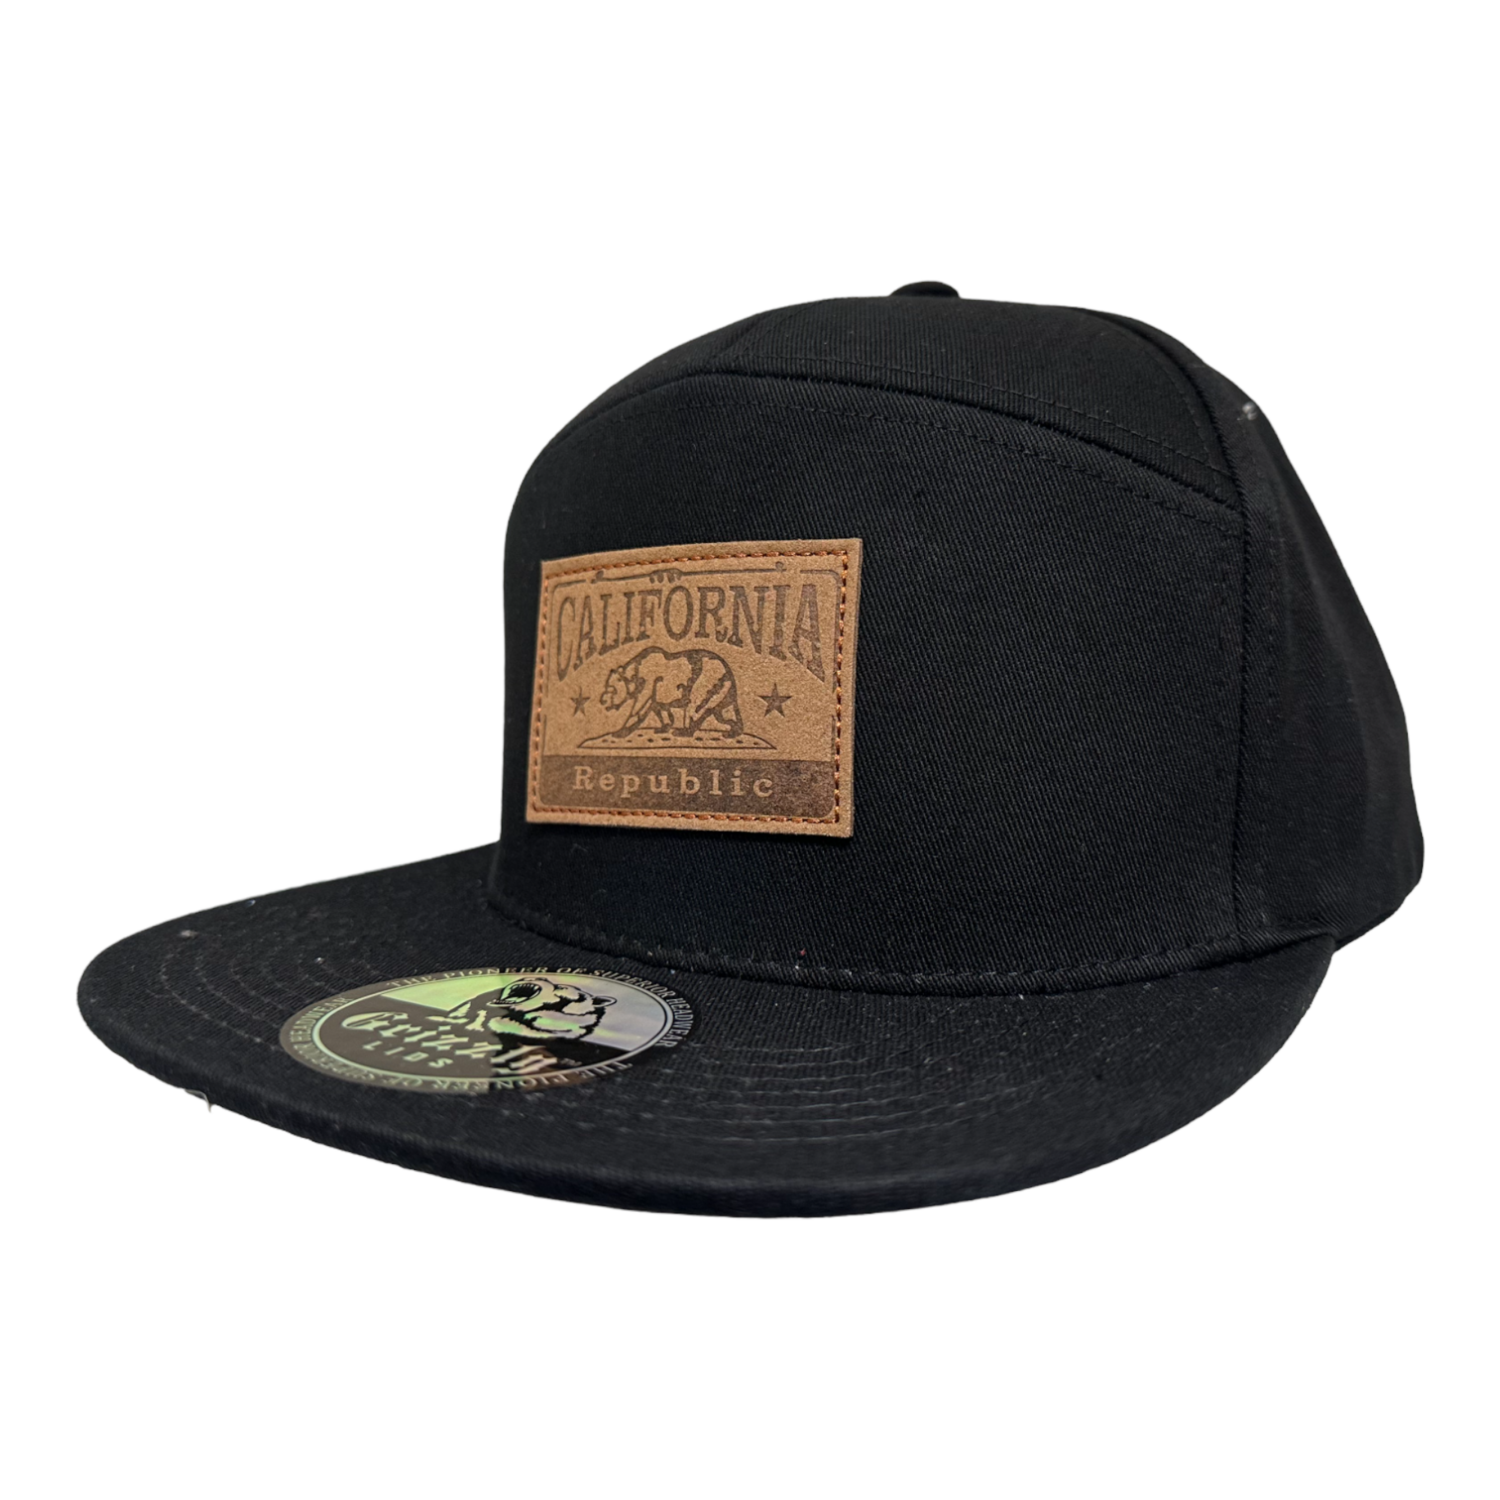 California Republic Leather Rectangle Patch Snapback 6 Panel Adjustable Snap Fit Hat